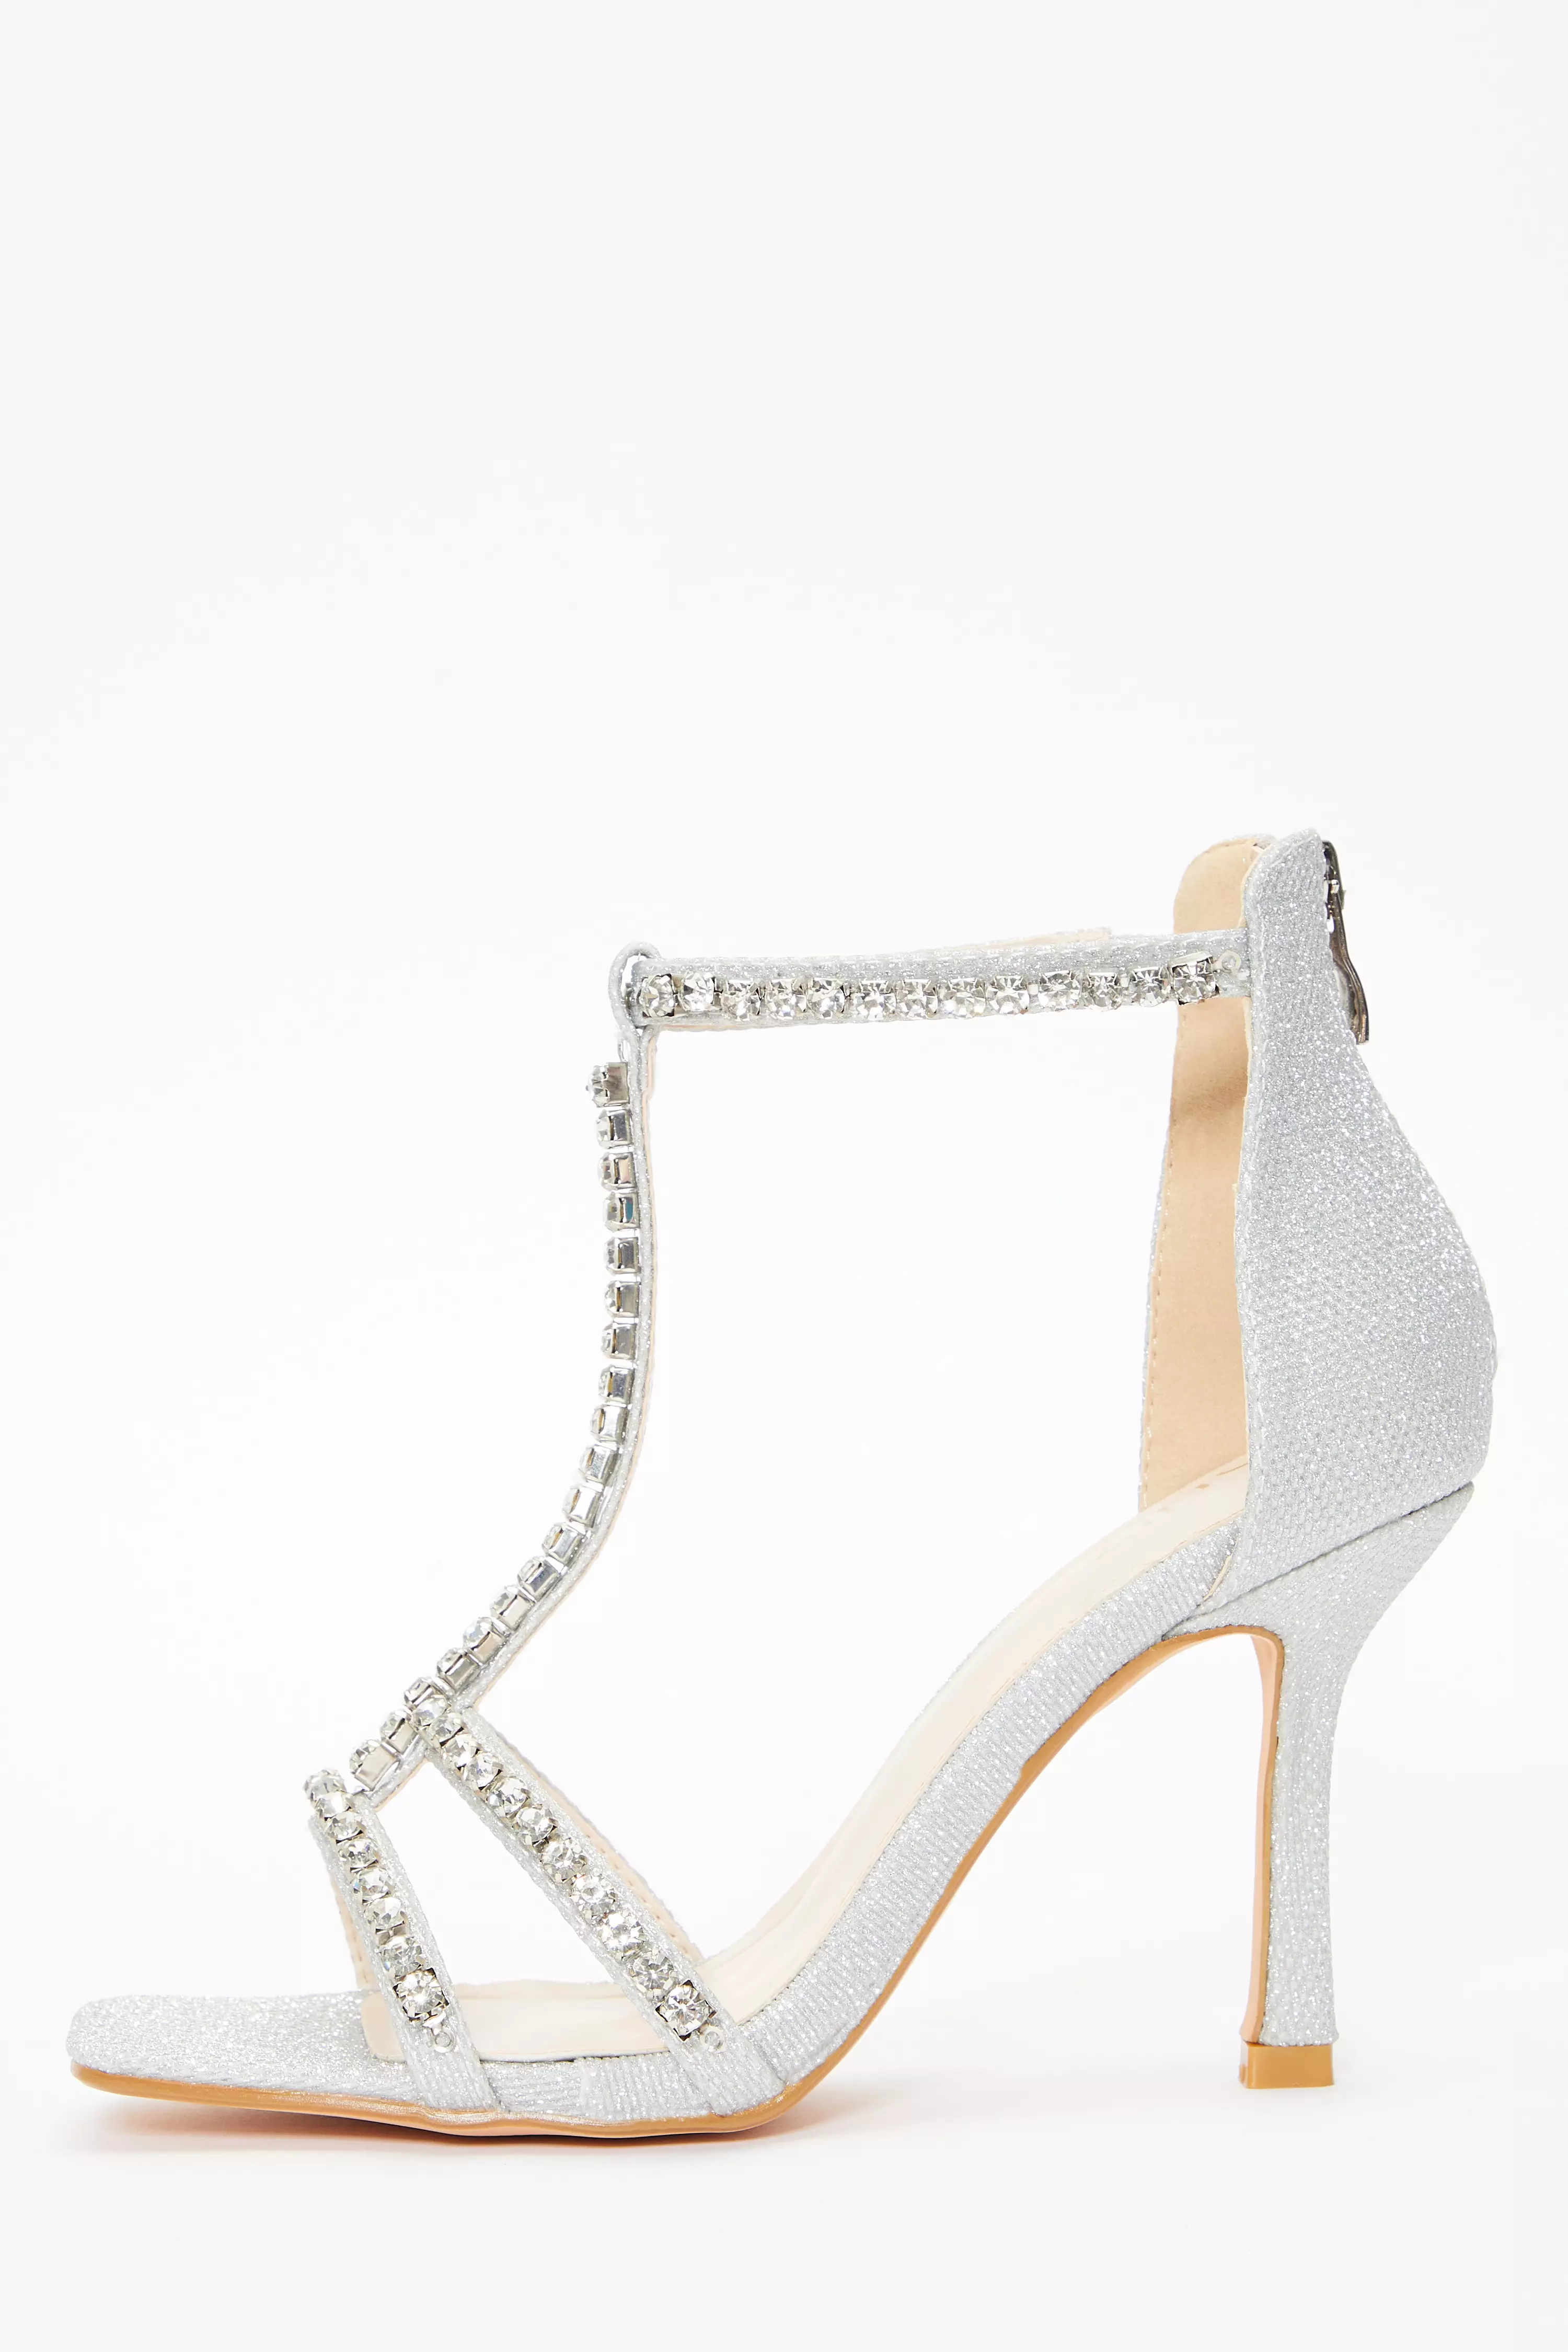 Silver Shimmer Diamante Stone T-Bar Heeled Sandals - QUIZ Clothing